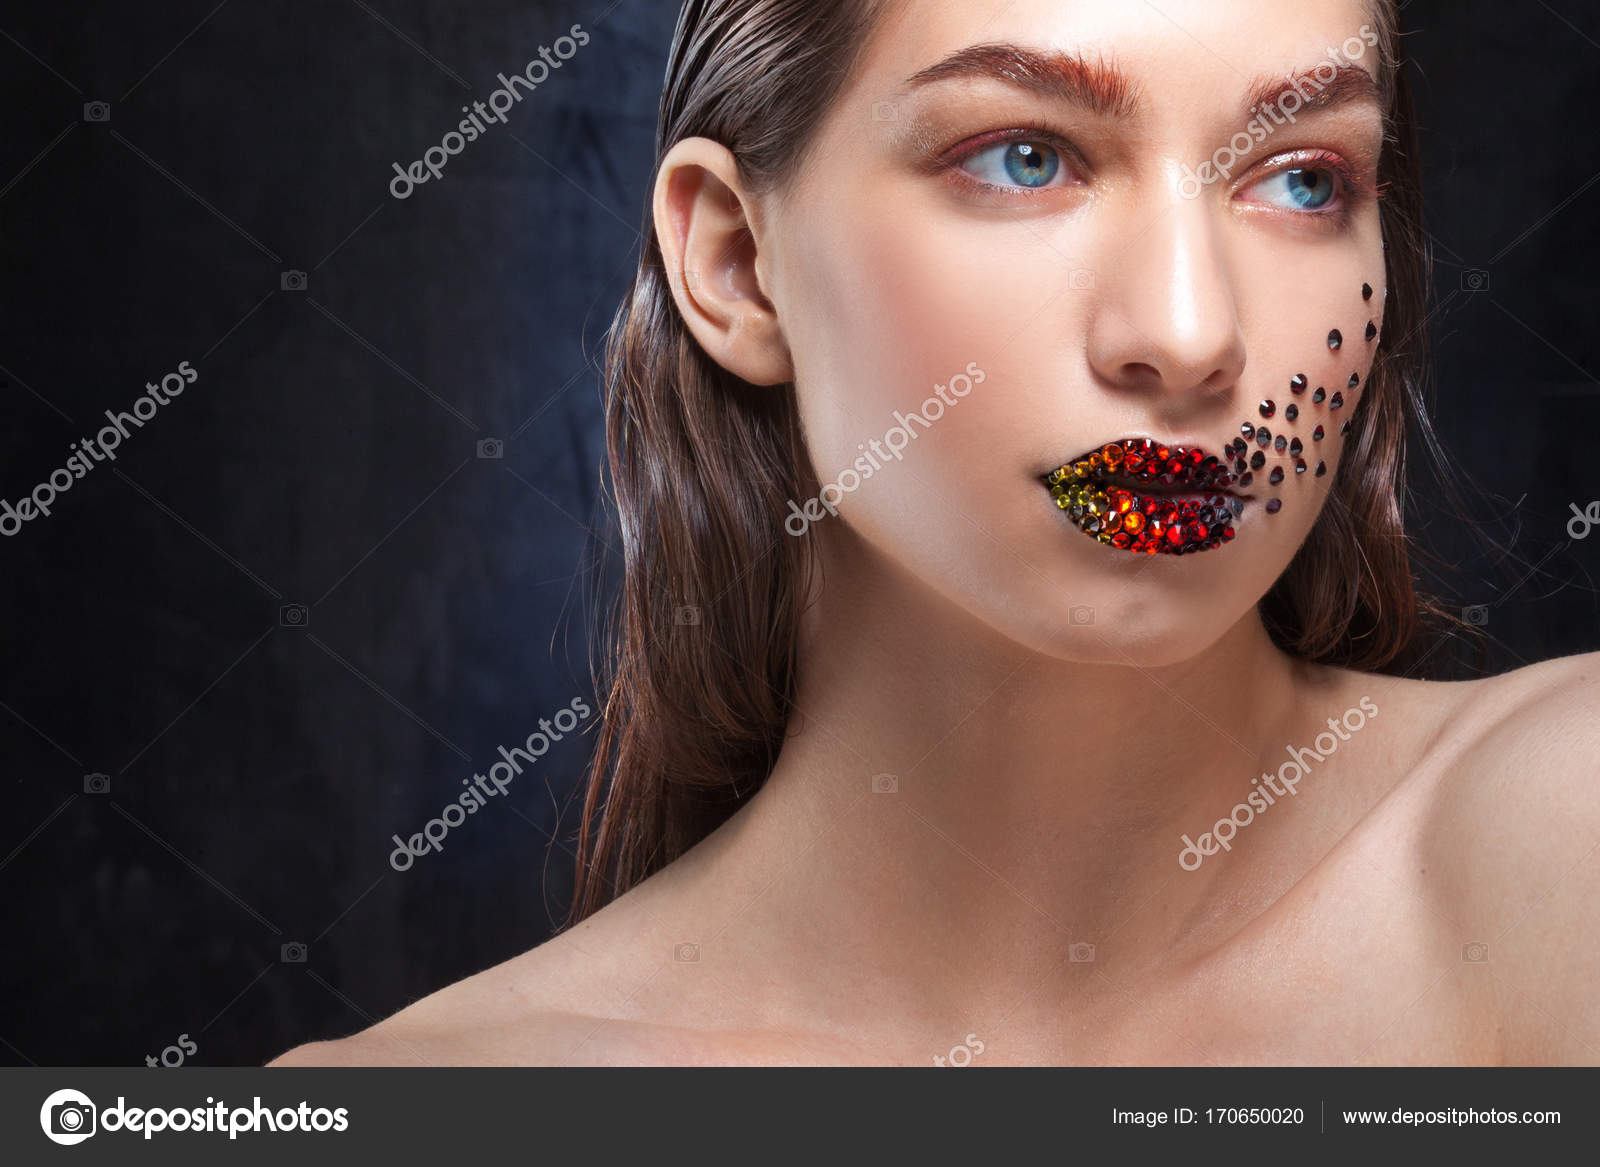 Rhinestones For Eyes Makeup Young Beautiful Girl With Blue Eyes Bright Makeup Red Lipstick